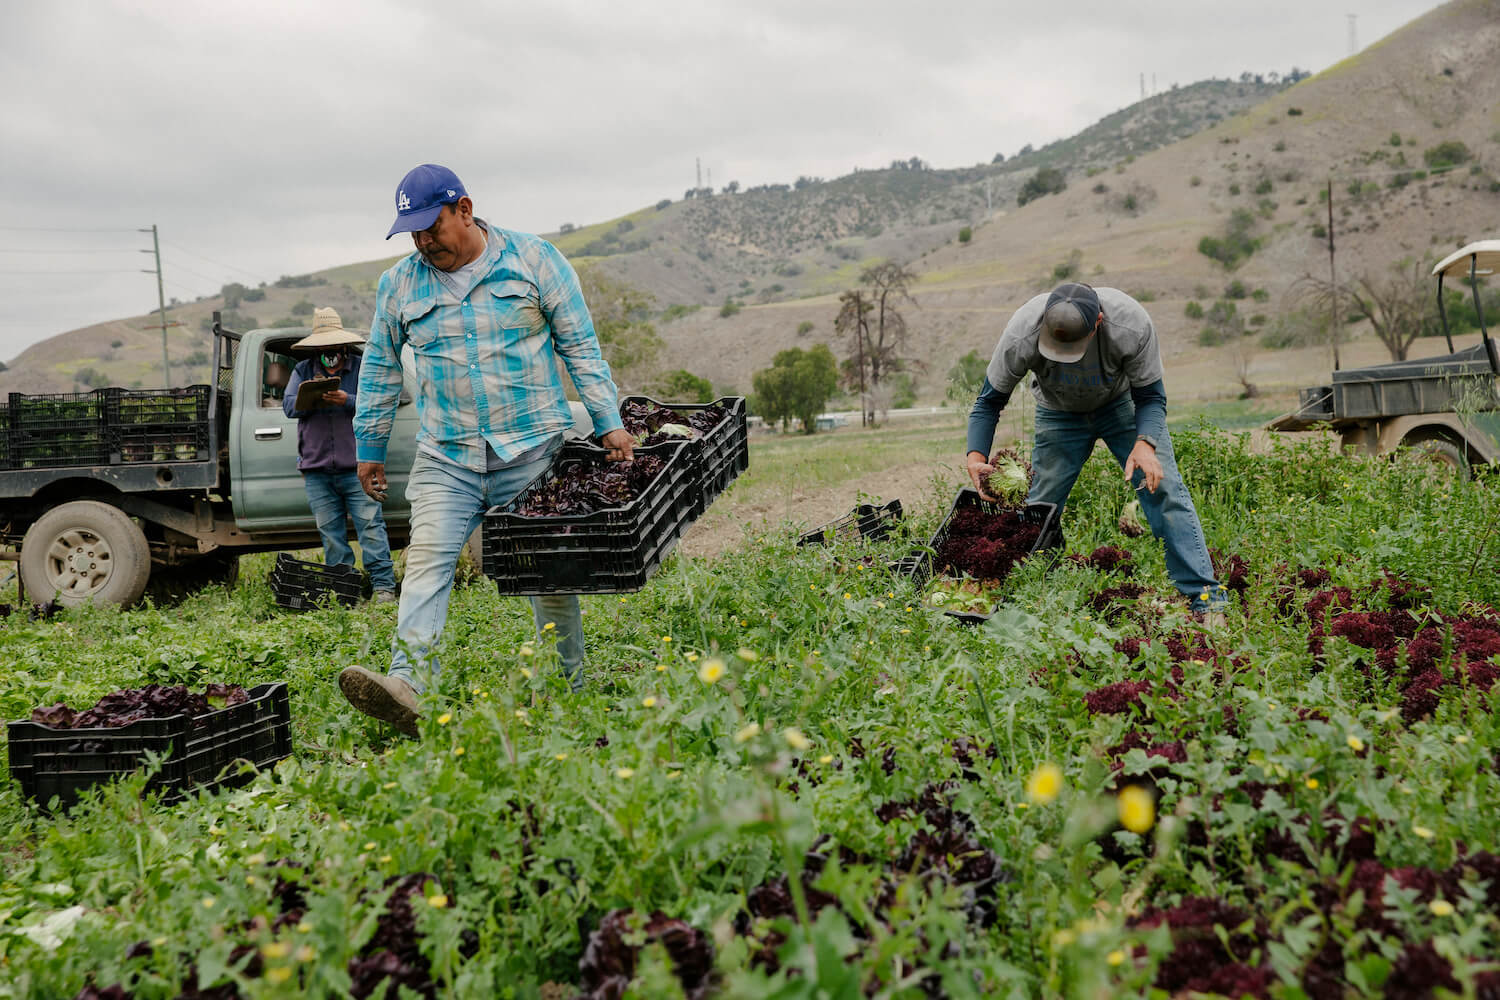 José Martinez, left, Victor Rodriguez, center, and Romeo Coleman, right harvest produce, some of which is delivered to John Fonteyn's CSA boxes, while the rest of Coleman Family Farms' produce is sold at the Santa Monica markets. May 2021